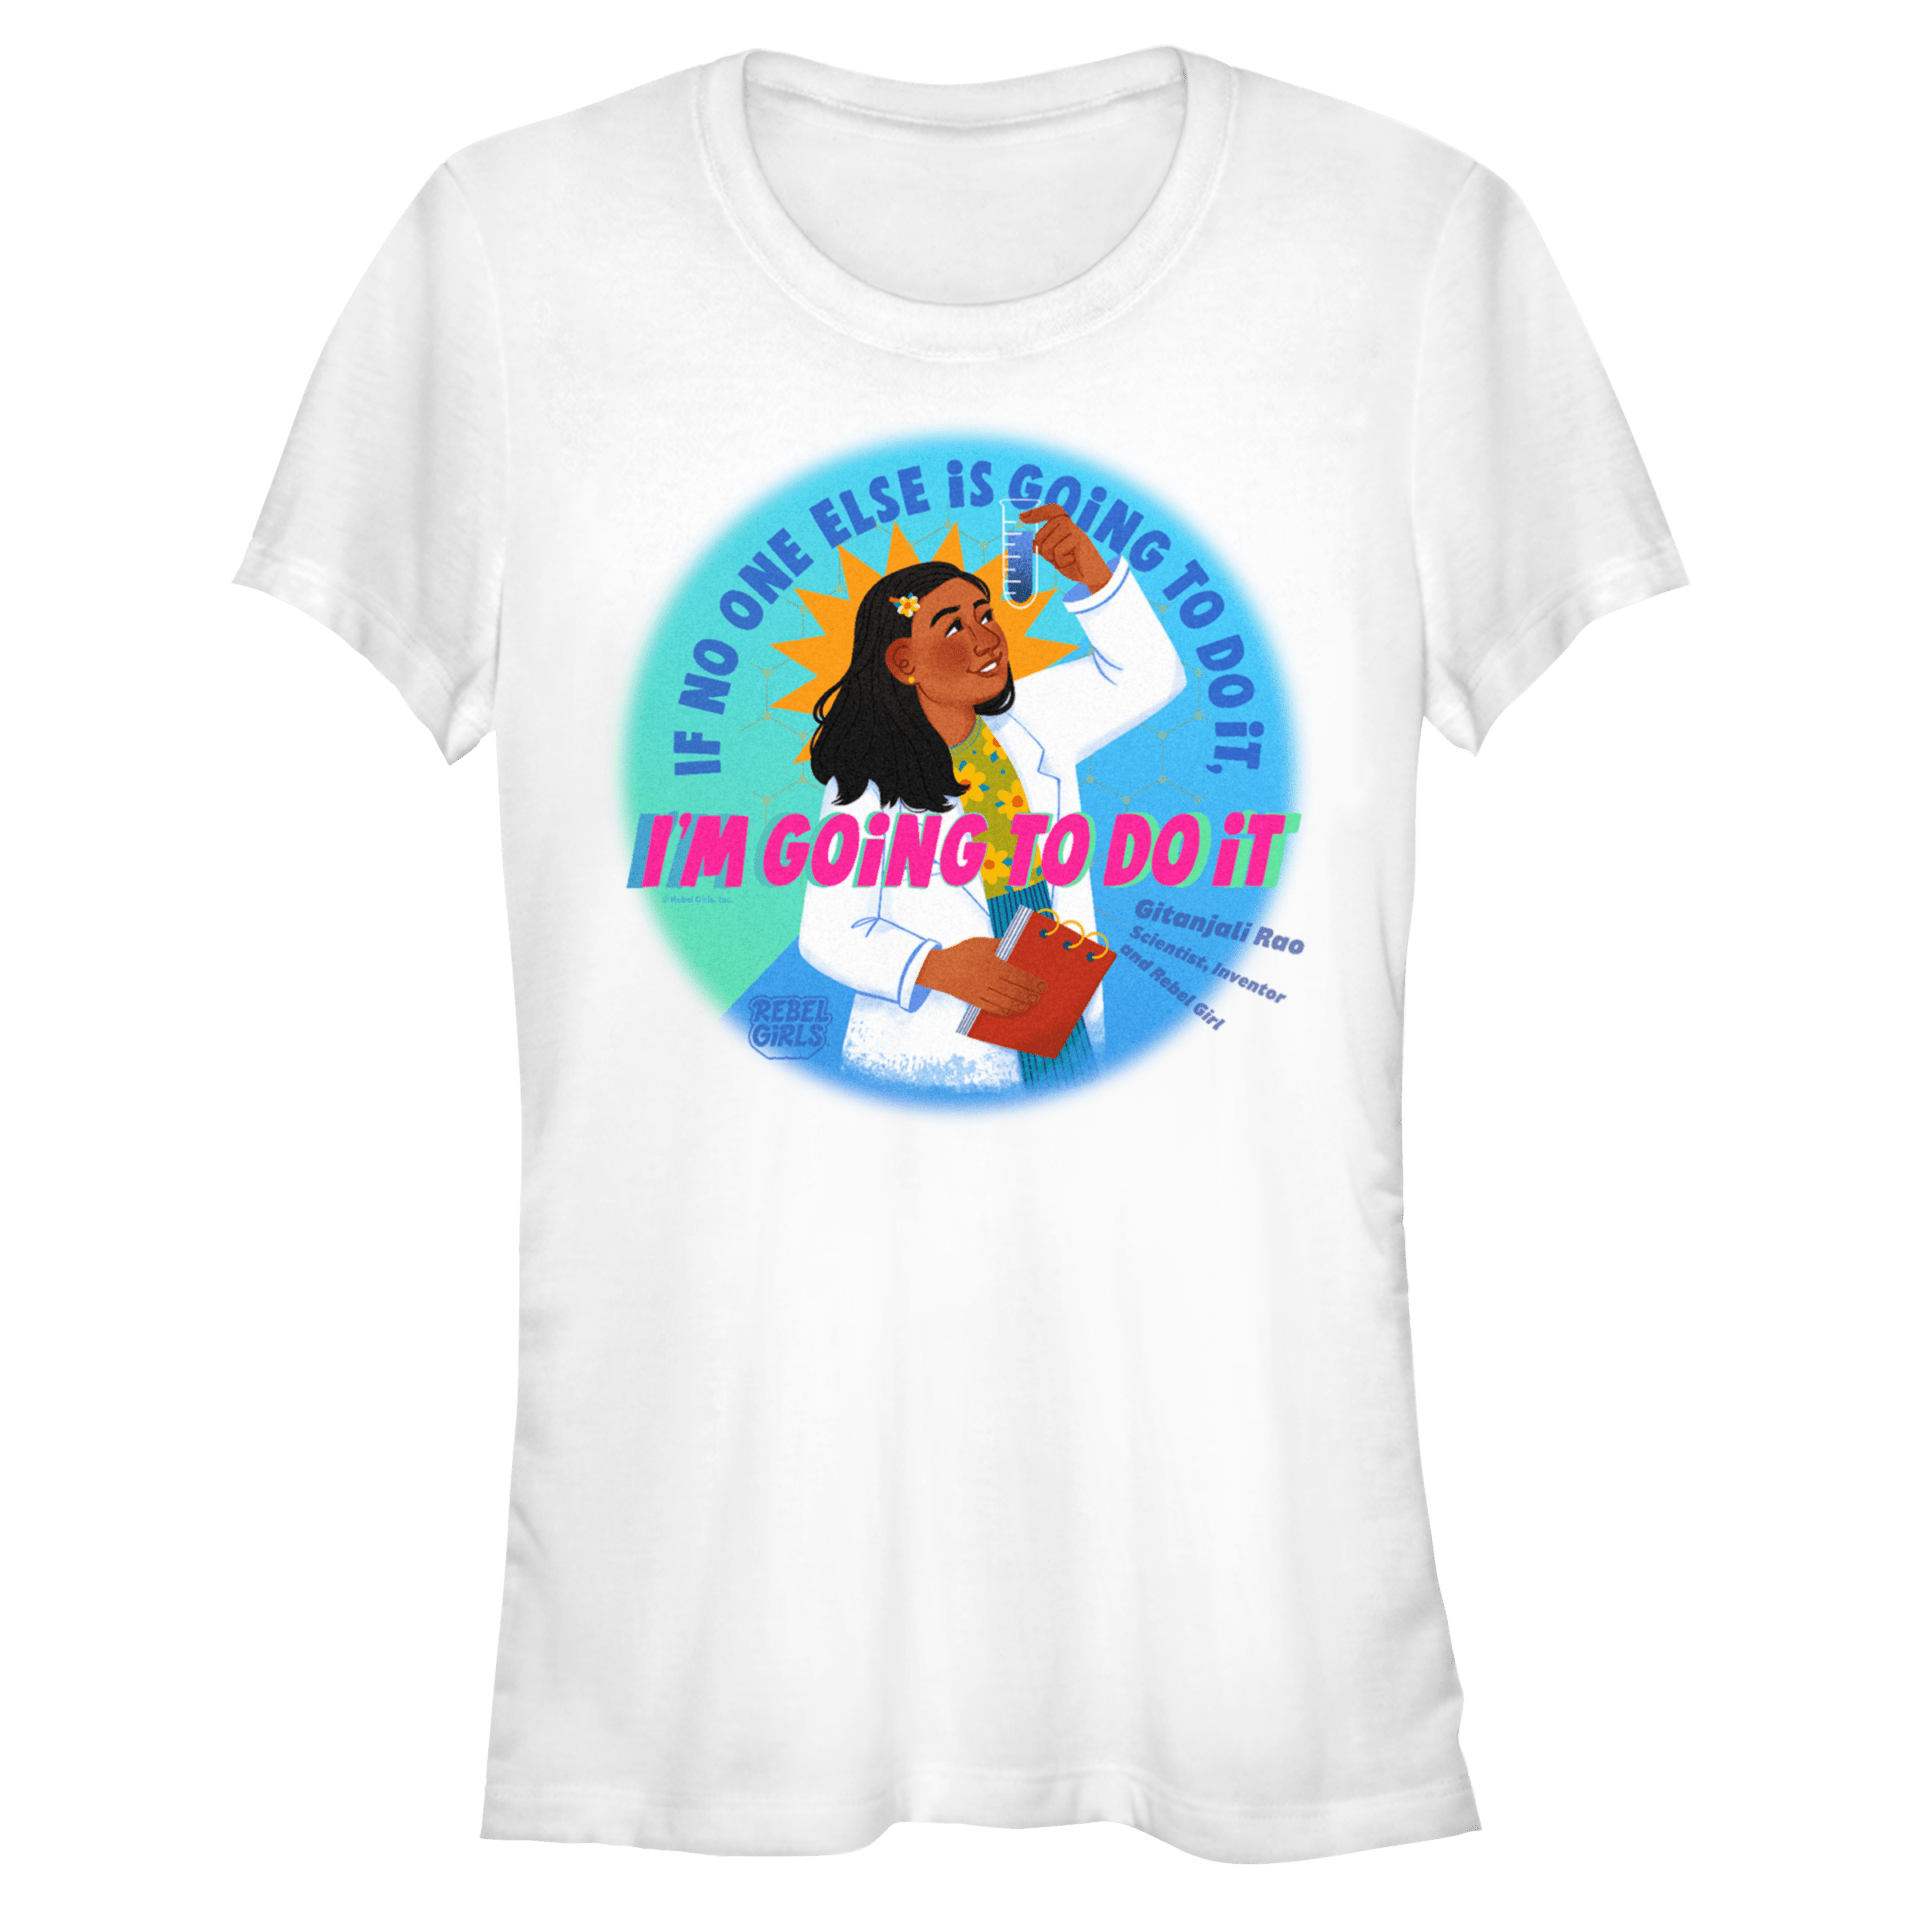 “Gitanjali Rao: I’m Going To Do It” Tees and Tops